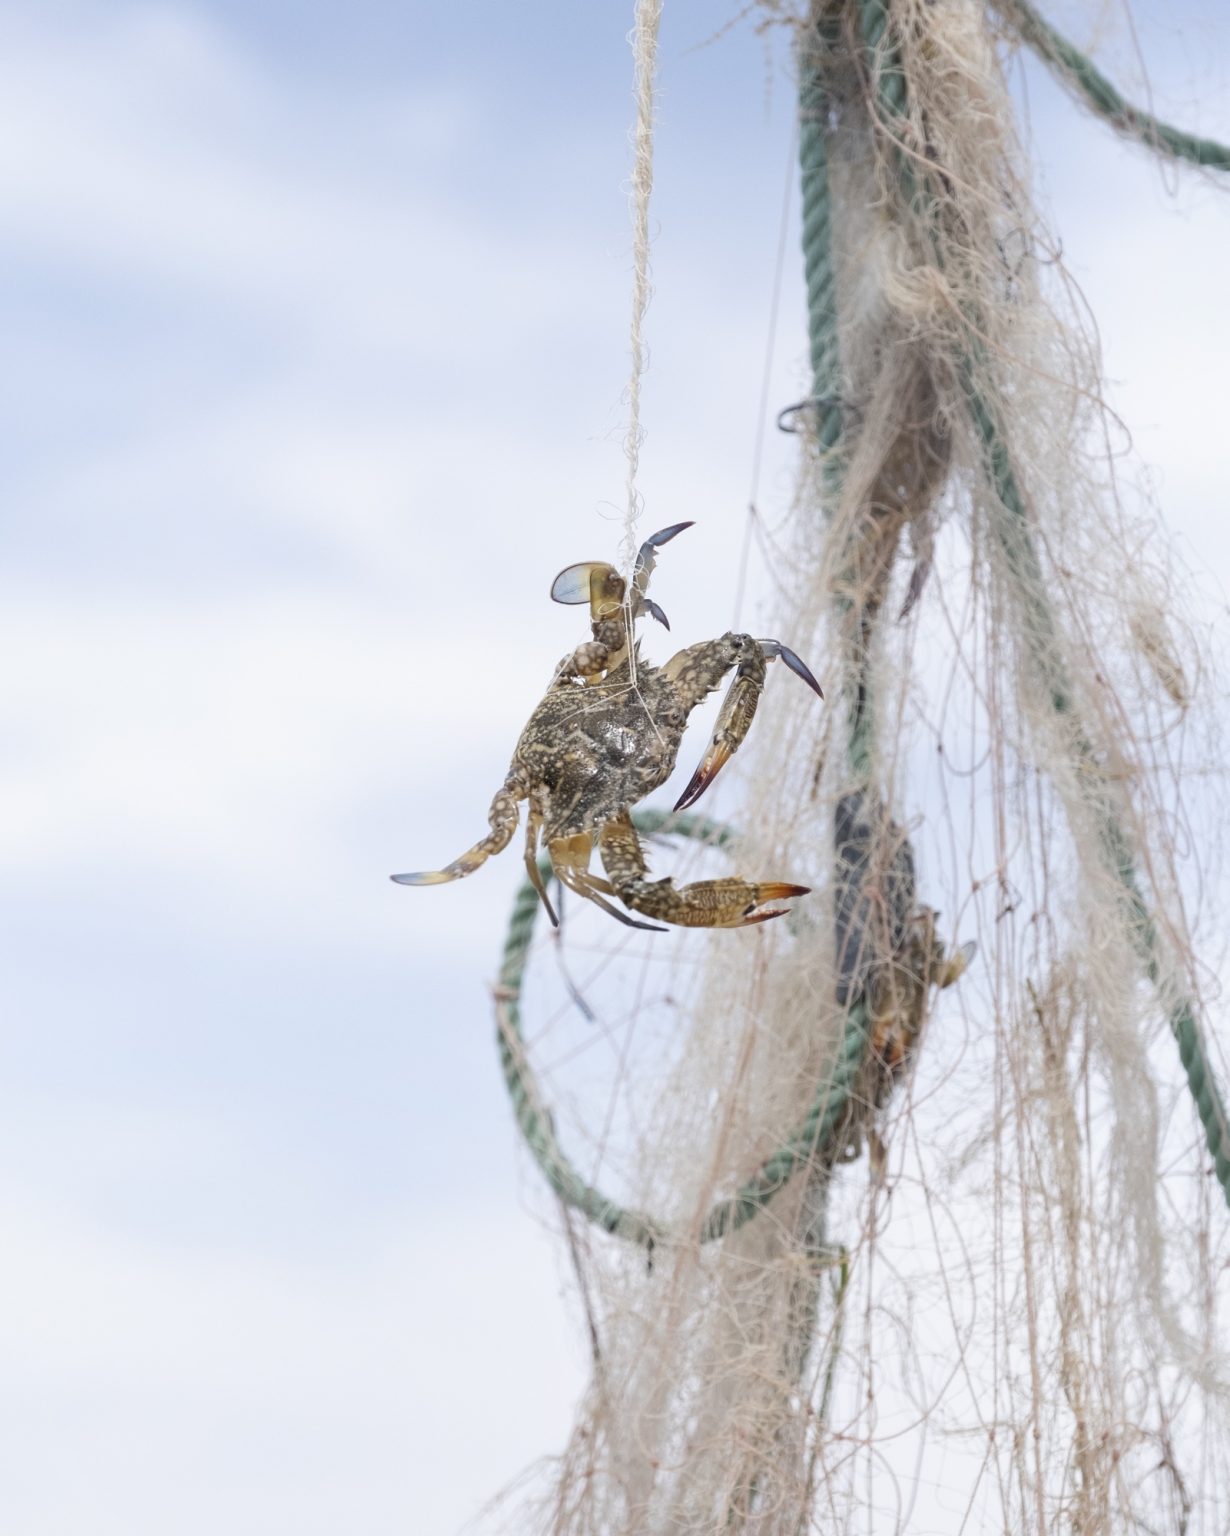 Kerkennah Islands (Tunisia), June 2022 - A crab entangled in fishing nets. The blue crab (Portunus segnis) is an invasive alien species from the Red Sea, which arrived in the Gulf of Gabès in 2014, with a population explosion in August 2015, finding favorable conditions for its settlement thanks to the vulnerability of the ecosystem and climate change. Along with other factors, including pollution and intensive fishing, the blue crab is among the causes that have led to the decline of marine biodiversity in the gulf. Nicknamed 'Daesh' by fishermen because of its devastating impact on the marine ecosystem and on fishing nets that are cut by the power of the claws and the spines around them, this crab feeds on many of the marine species present in the gulf, mainly crustaceans, molluscs and fish. It is assumed that the route of introduction into the Mediterranean was that of maritime traffic, within the ballast waters of the ships.
><
Isole Kerkennah (Tunisia), giugno 2022 - Un granchio impigliato nelle reti da pesca. Il granchio blu (Portunus segnis) è una specie aliena invasiva proveniente dal Mar Rosso, arrivata nel Golfo di Gabès nel 2014, con unesplosione demografica nellagosto del 2015, trovando condizioni favorevoli al suo insediamento grazie alla vulnerabilità dellecosistema e ai cambiamenti climatici. Insieme ad altri fattori, tra cui linquinamento e la pesca intensiva, il granchio blu è tra le cause che hanno portato al declino della biodiversità marina nel golfo. Soprannominato dai pescatori Daesh a causa del suo impatto devastante sullecosistema e sulle reti da pesca, che vengono tagliate dalle potenza delle chele e dalle spine presenti attorno ad esse, questo granchio si ciba di molte delle specie marine presenti nel golfo, principalmente crostacei, molluschi e pesci. Si ipotizza che la via di introduzione nel Mediterraneo sia stata quella del traffico marittimo, allinterno delle acque di zavorra delle navi.